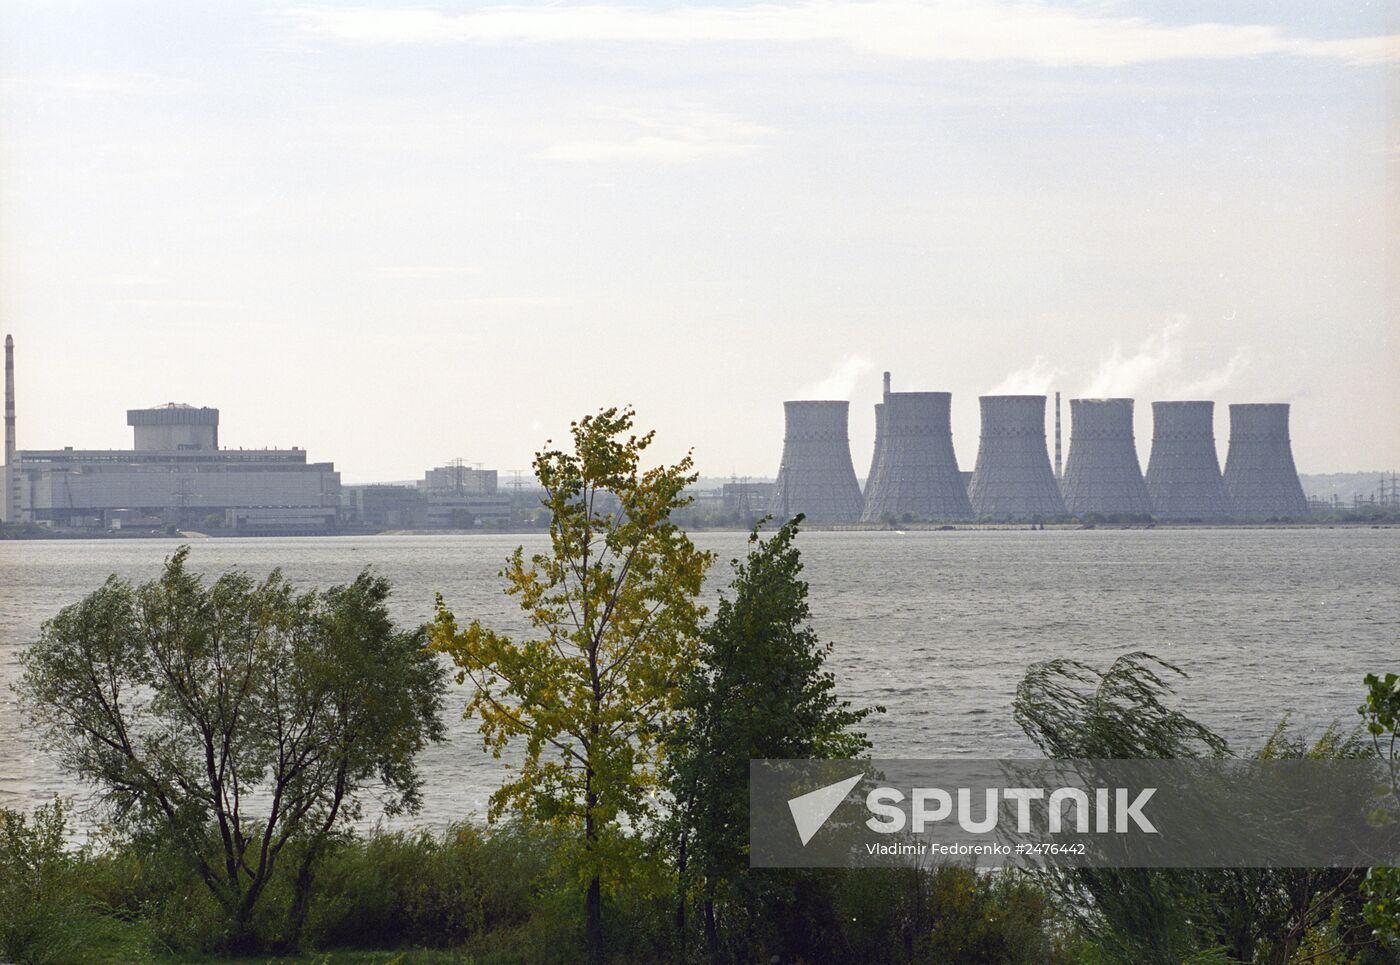 The Novovoronezh nuclear power plant